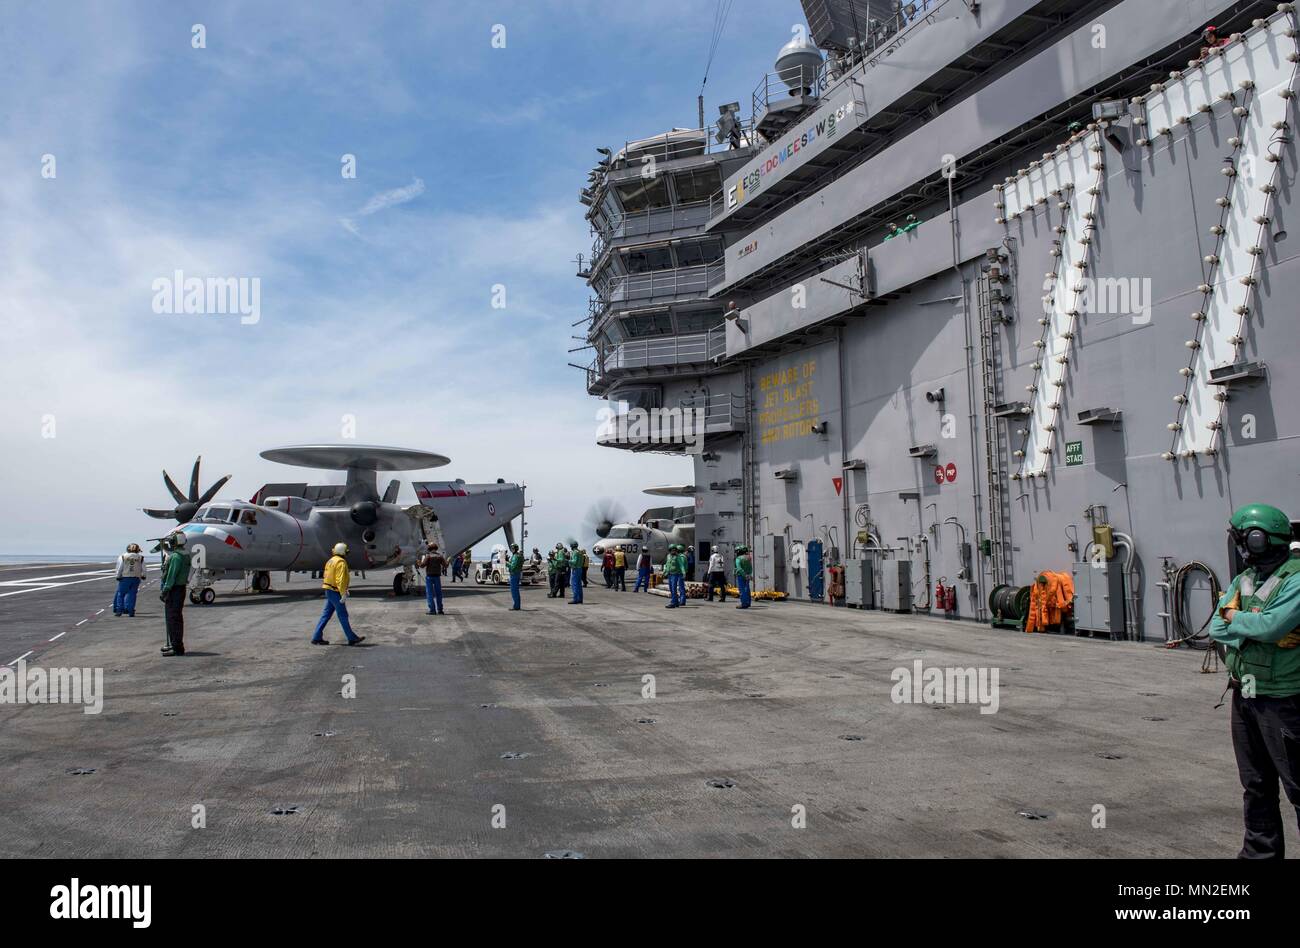 180510-N-UV609-0278 ATLANTIC OCEAN (May 10, 2018) American and French sailors taxi a E-2C Hawkeye attached to squadron 4F of the French navy aboard the aircraft carrier USS George H.W. Bush (CVN 77), May 10, 2018. The ship is underway in the Atlantic Ocean conducting carrier air wing exercises with the French navy to strengthen partnerships and deepen interoperability between the two nations' naval forces. (U.S. Navy photo by Mass Communication Specialist 2nd Class David Mora Jr.). () Stock Photo